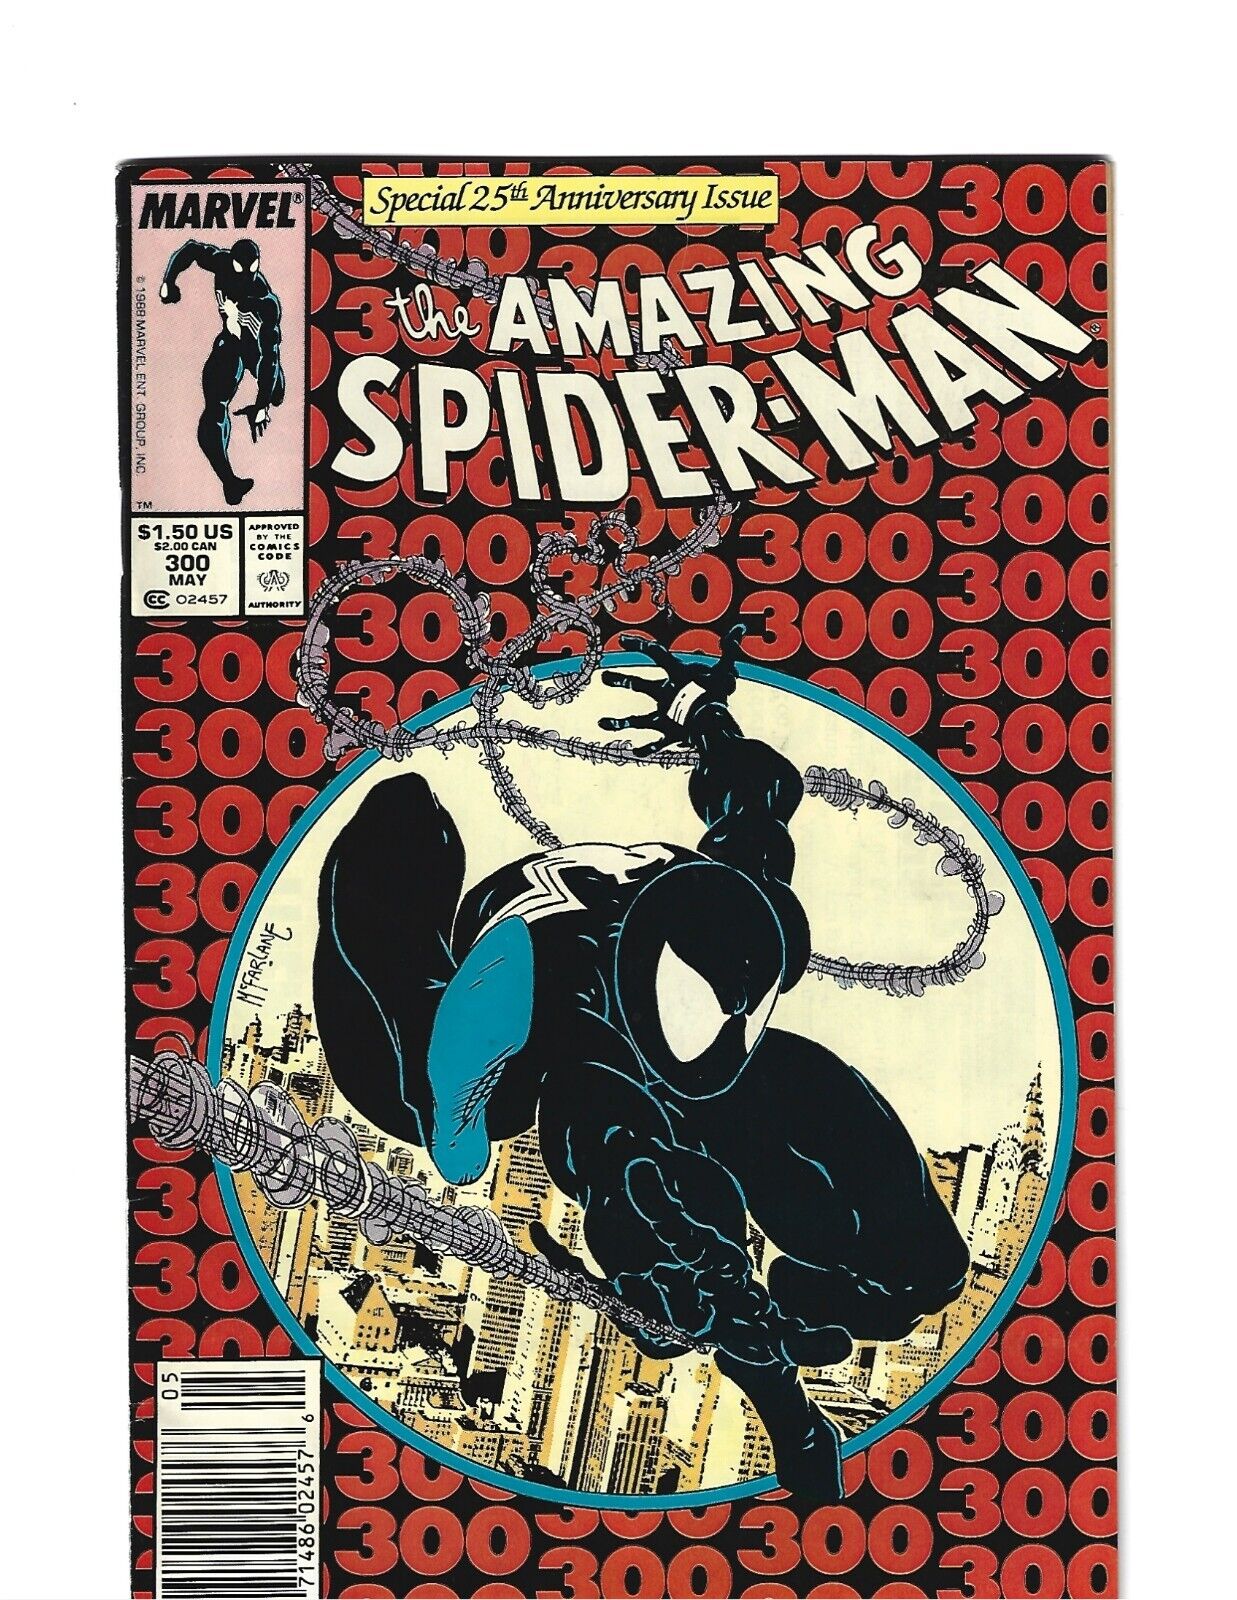 AMAZING SPIDERMAN 300  1989  90  WHITE PAGES  NEWSTAND EDITION SHARP BOOK